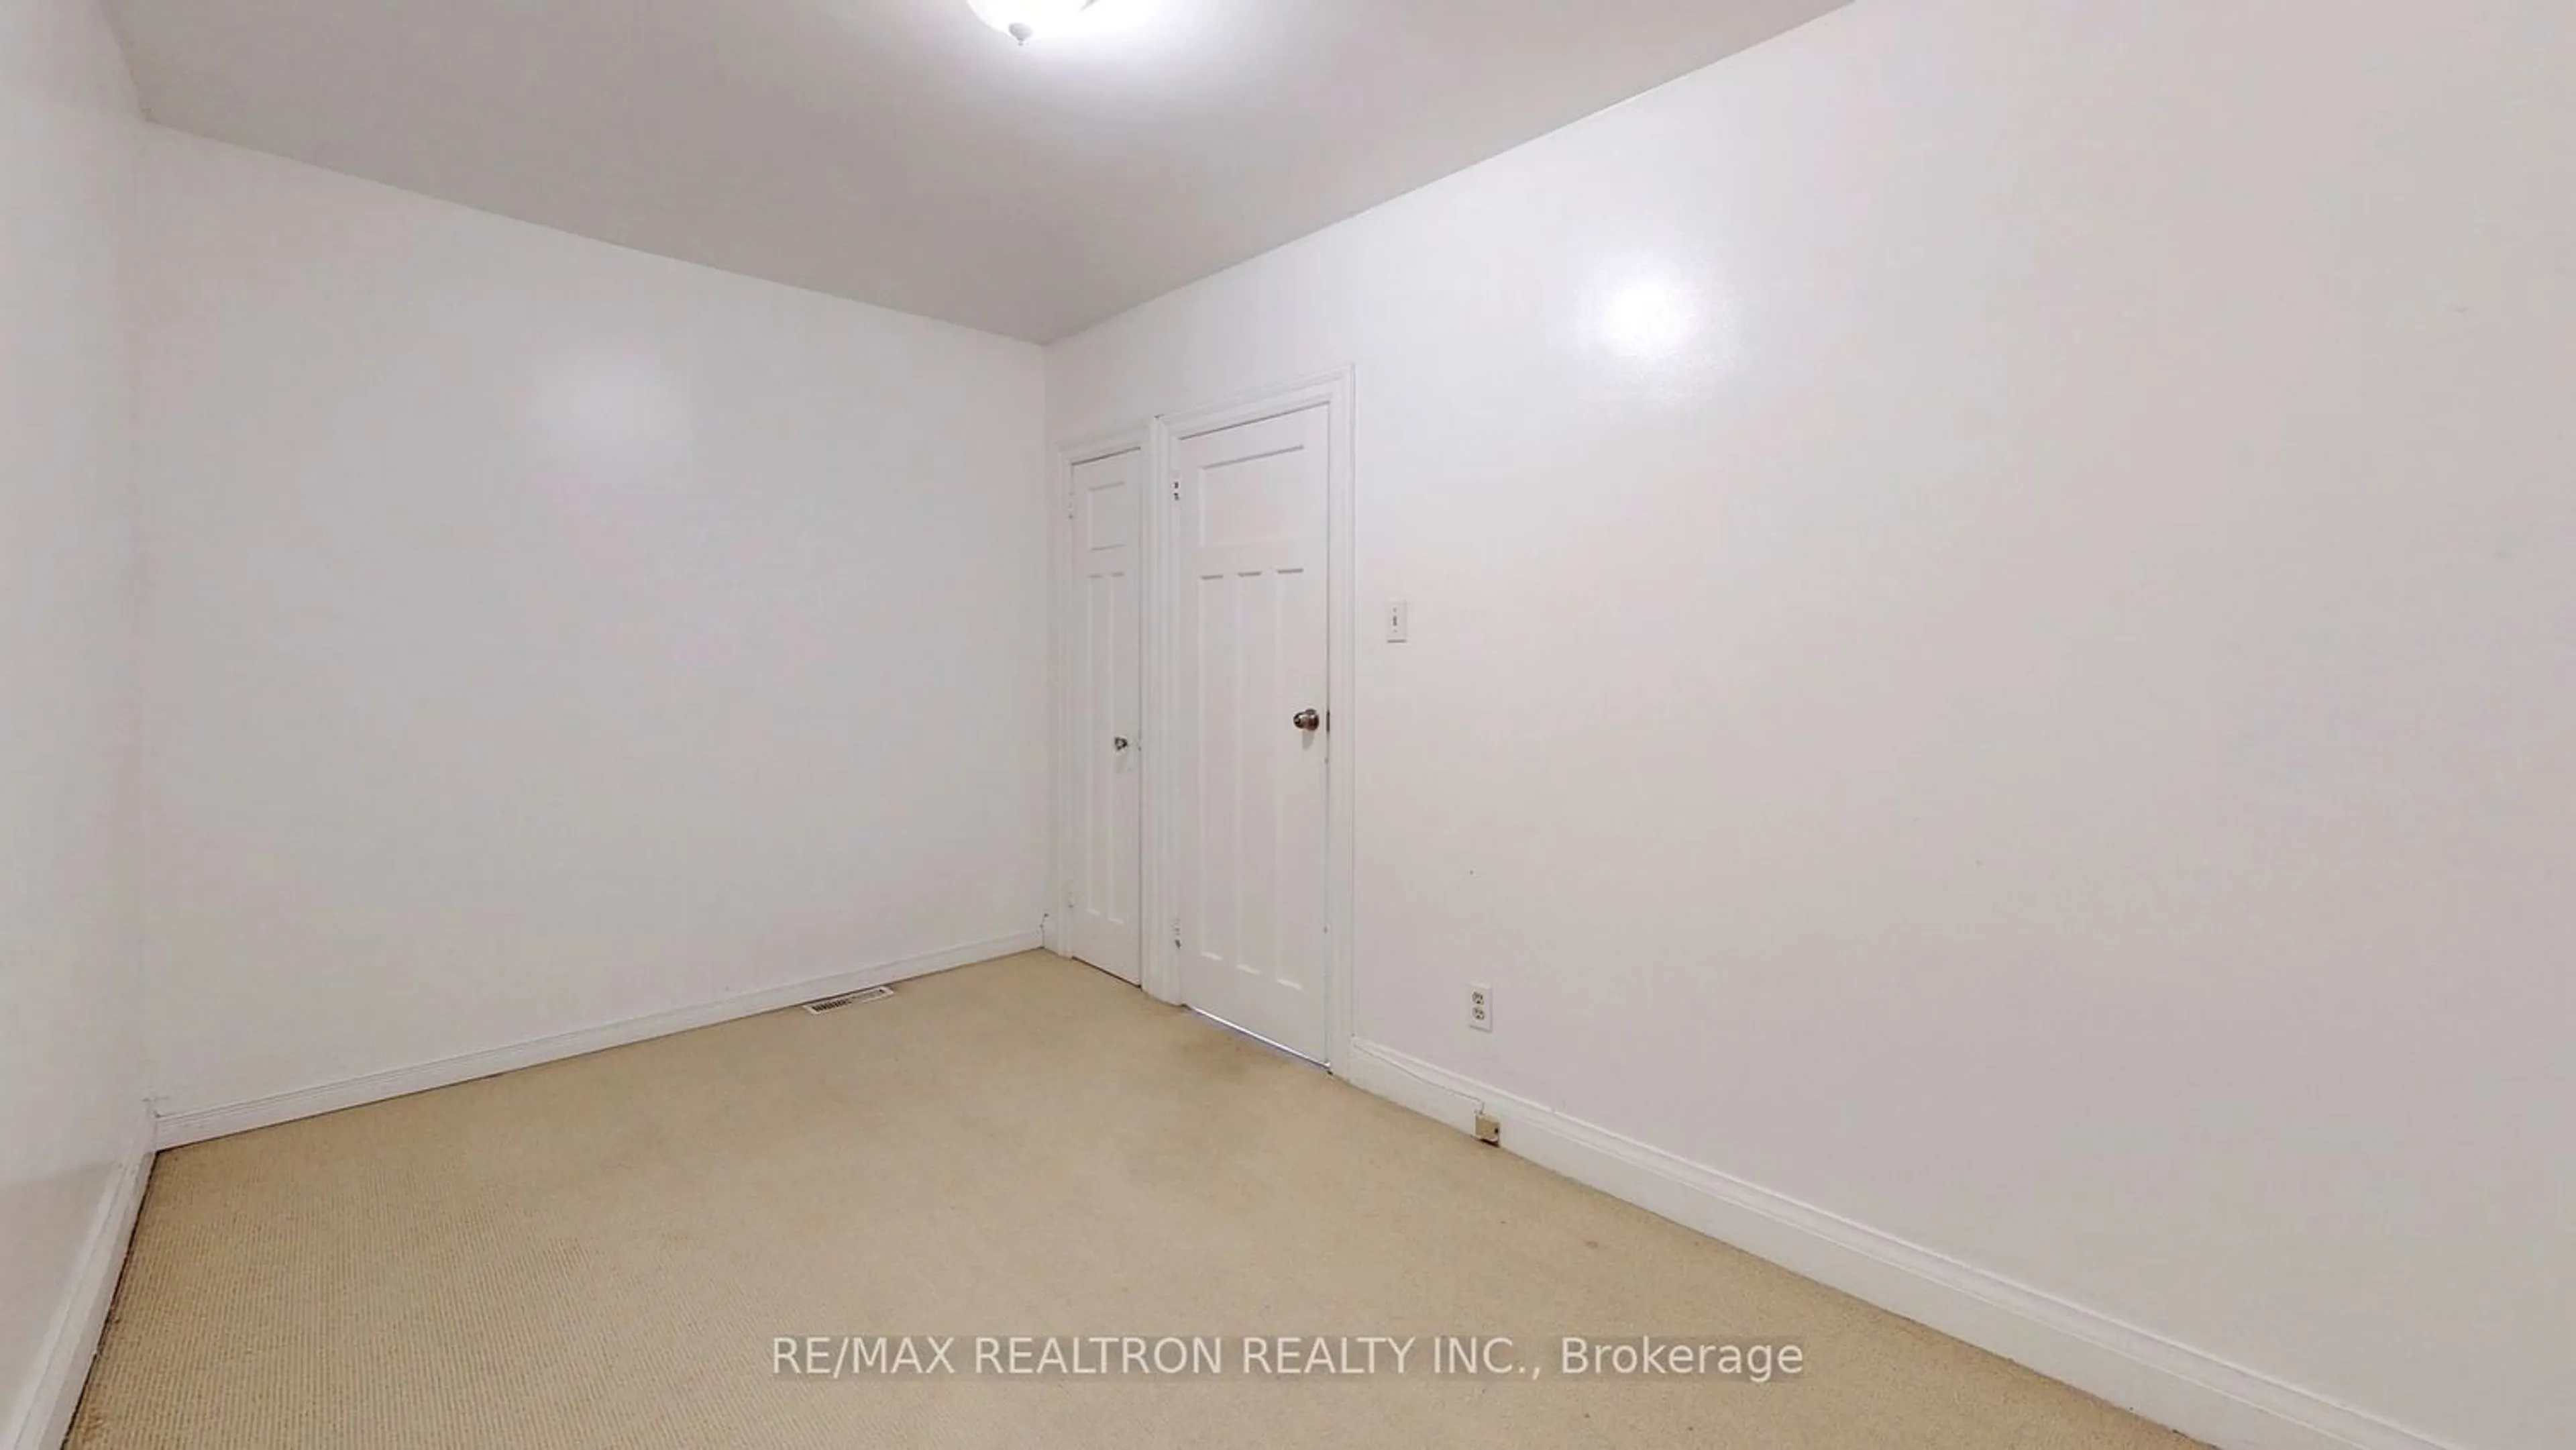 A pic of a room for 211 Harlandale Ave, Toronto Ontario M2N 1P6